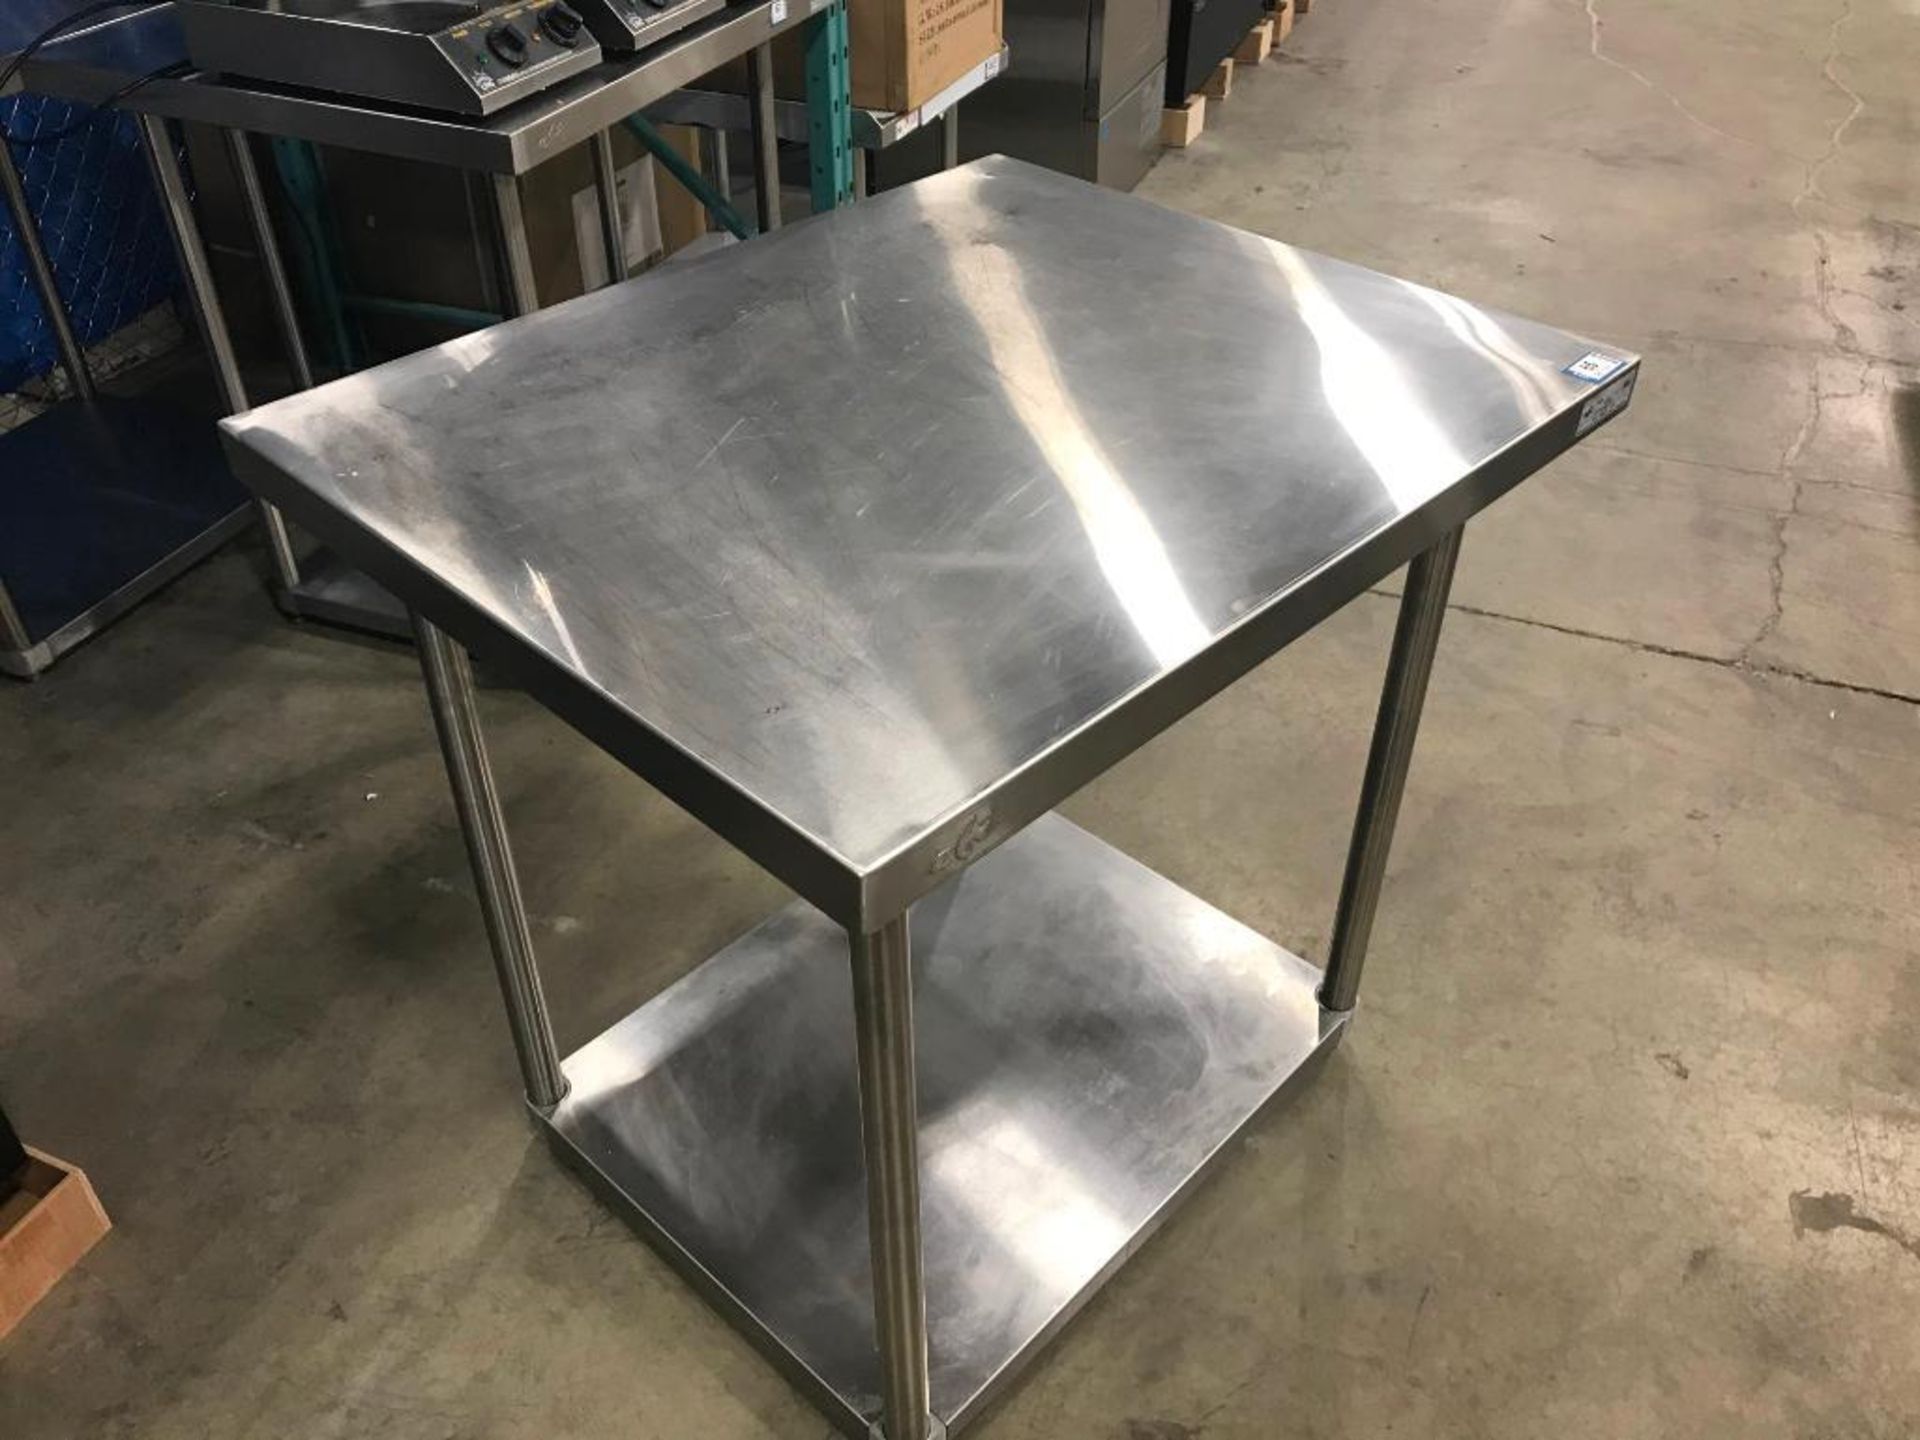 EFI 30" X 36" STAINLESS STEEL WORK TABLE WITH UNDERSHELF, EFI TS3036 - Image 3 of 4